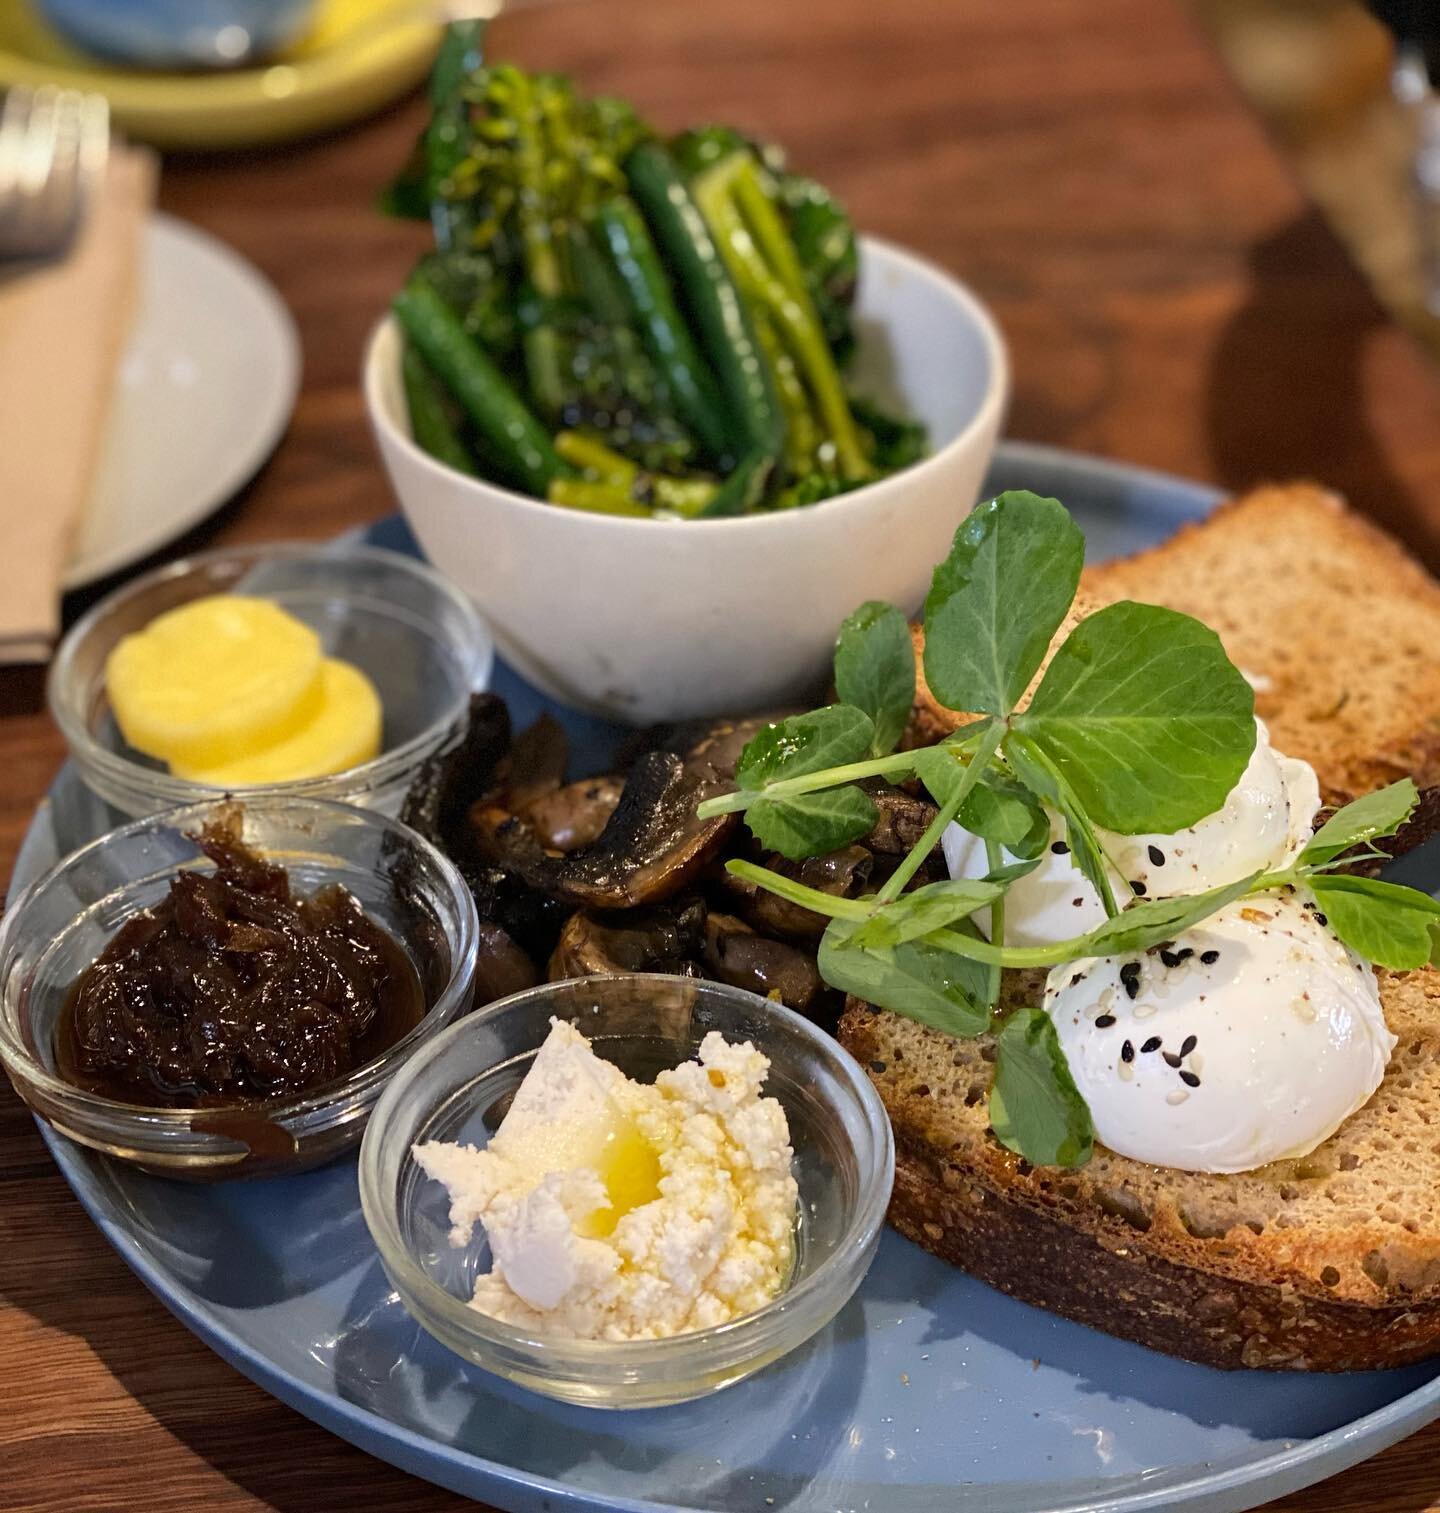 Poachies on dense and delicious wholemeal toast with a bunch of tasty sides @twochapscafe this morning. Spectacular day to be out and about, made all the better thanks to the spectacular @glutenfreefoodieau.